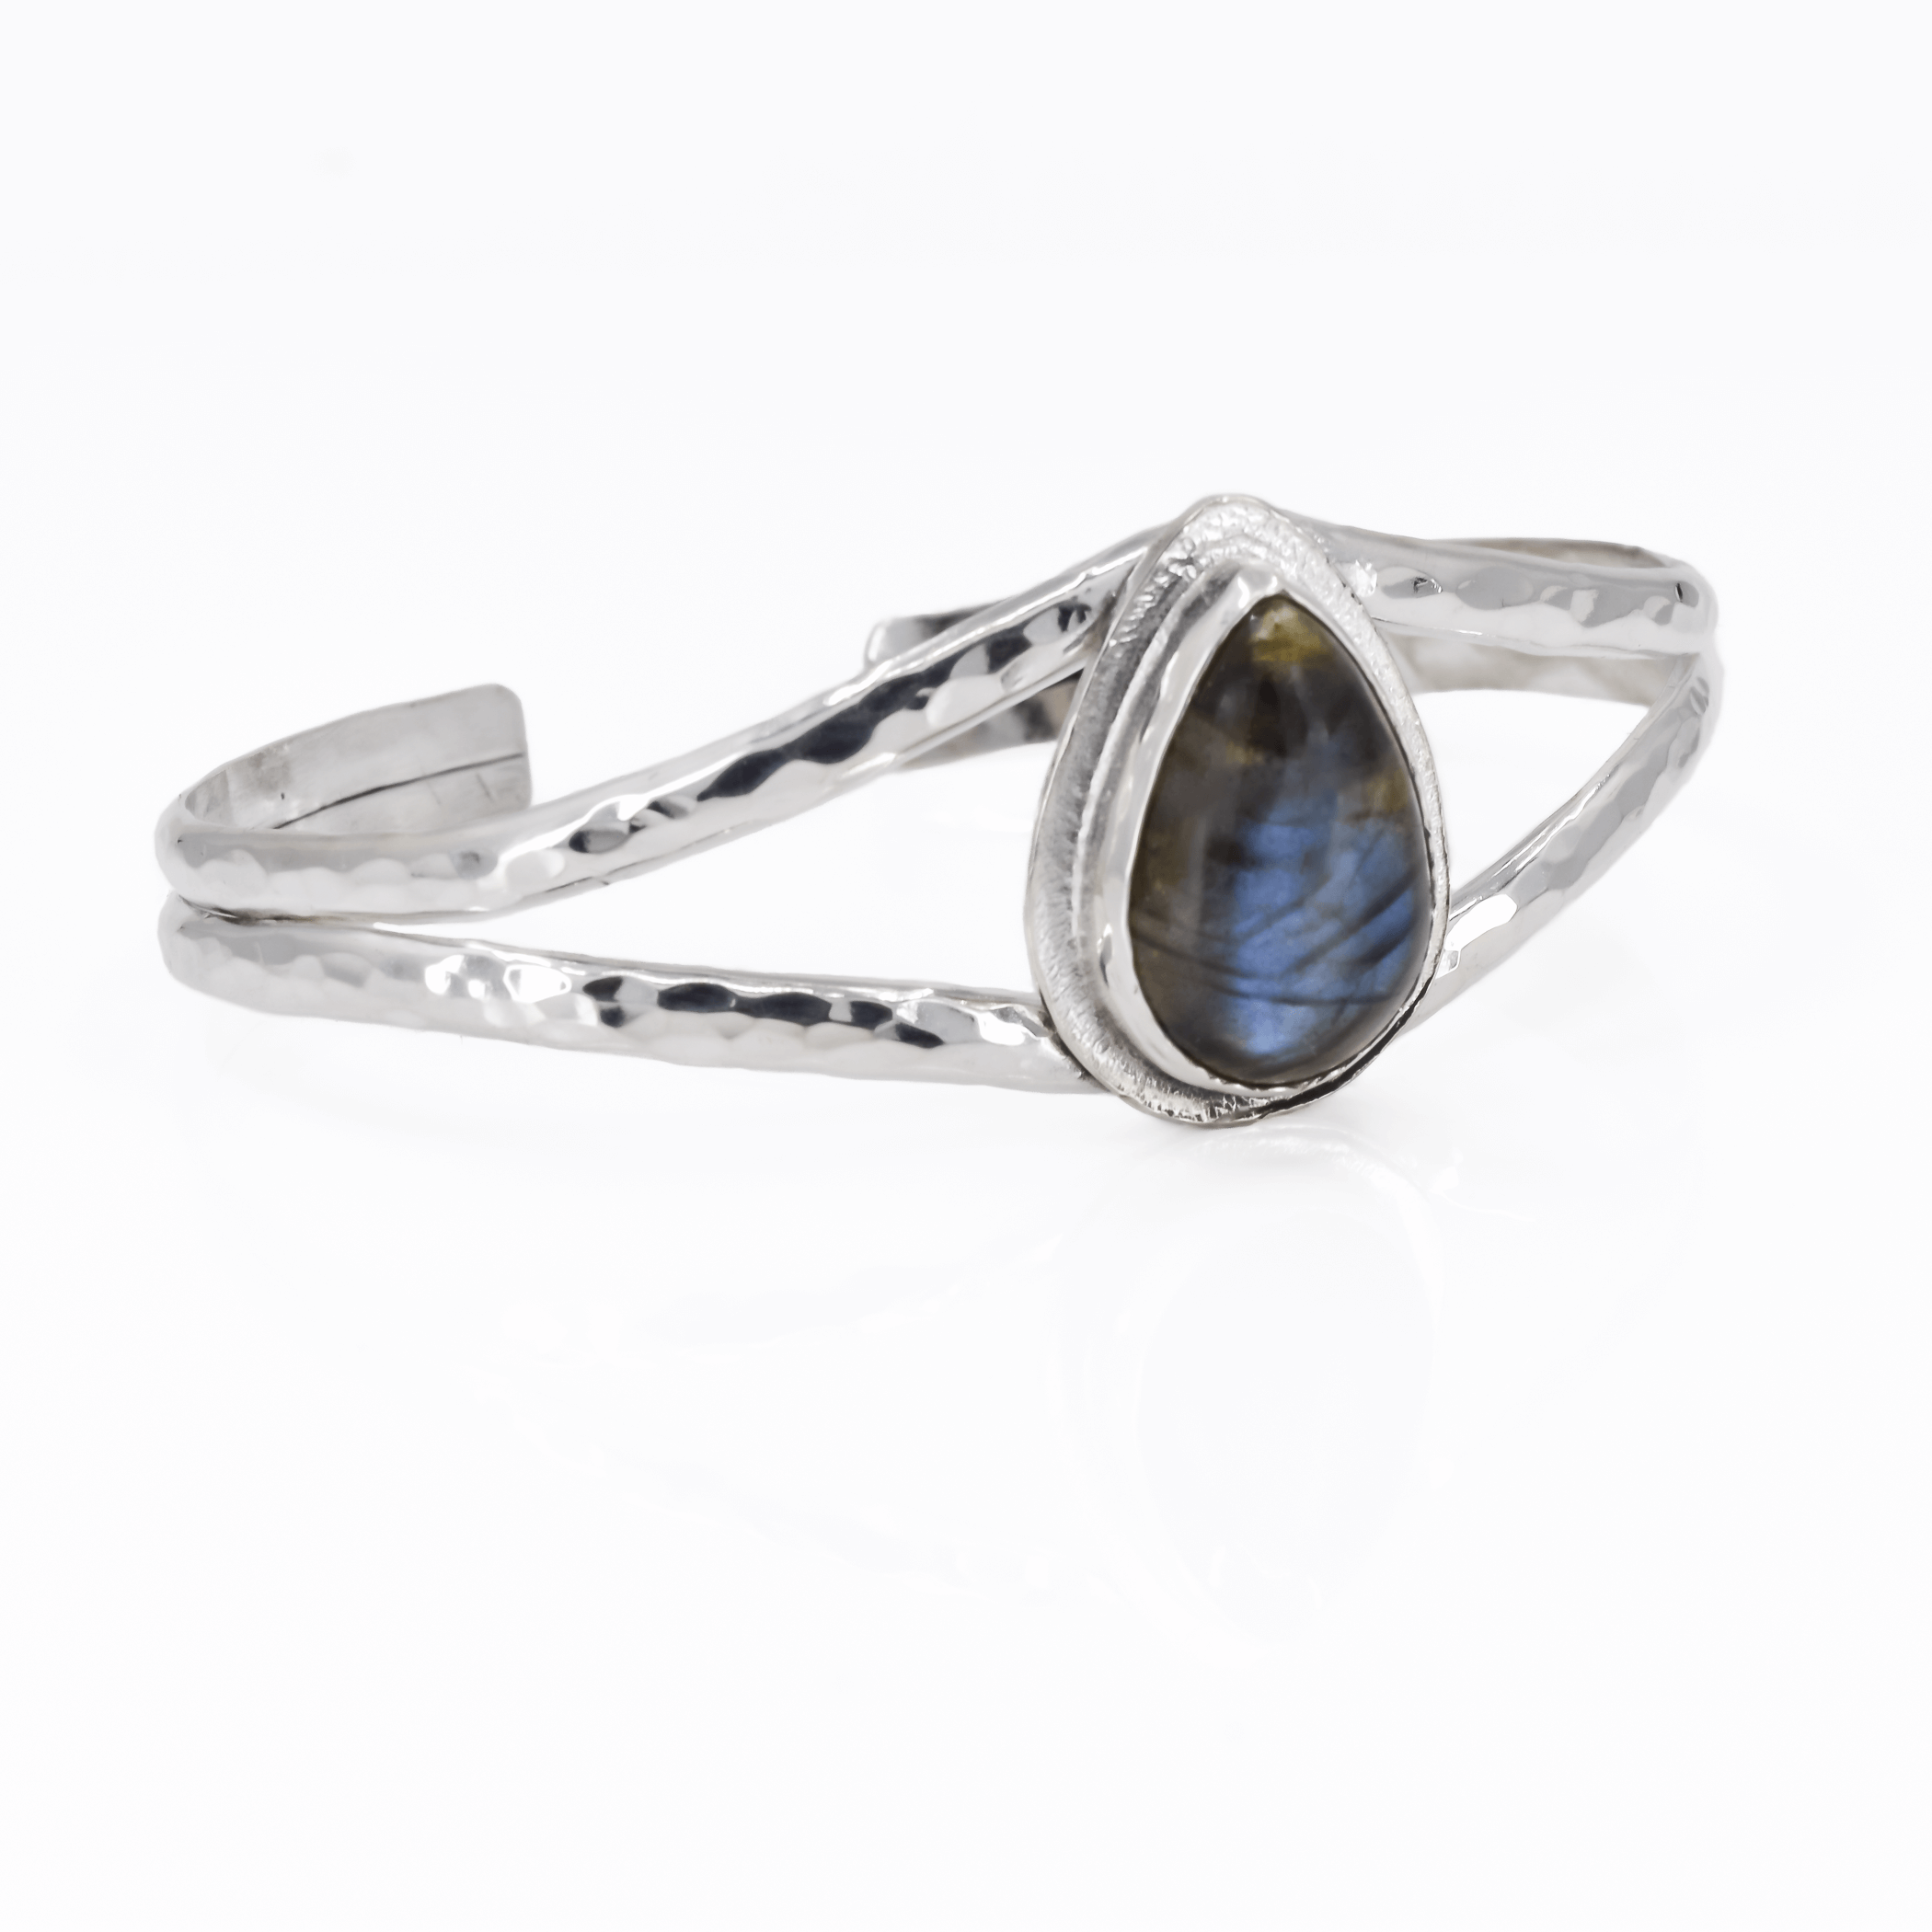 Sterling silver textured cuff with oval bluish green Labradorite stone